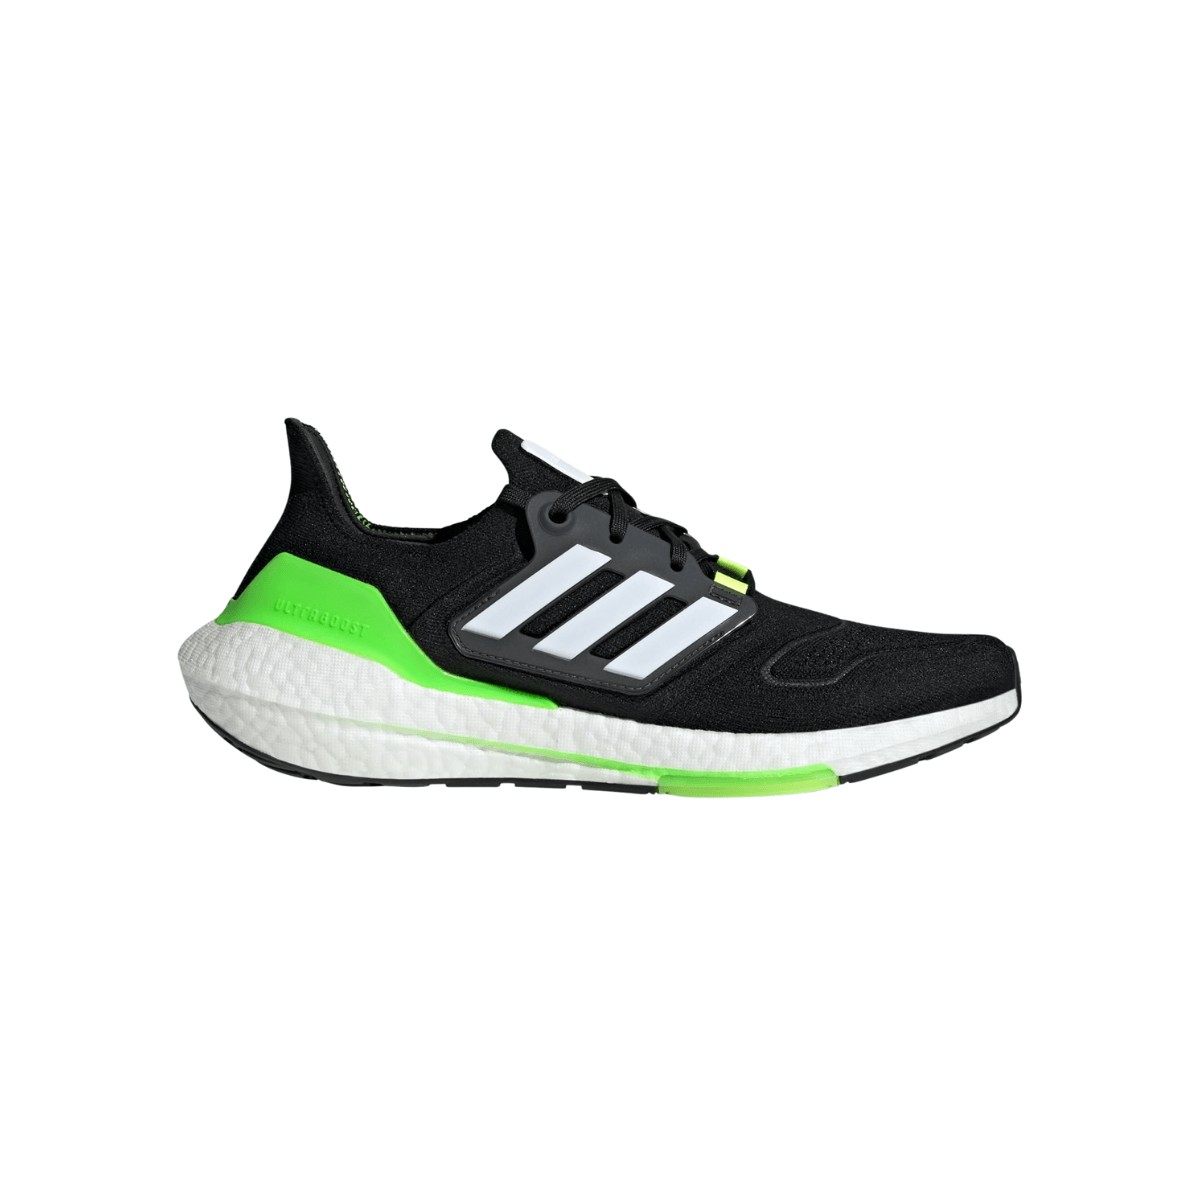 Adidas Ultraboost 22 Black White Green SS22 - Baskets, Taille UK 8